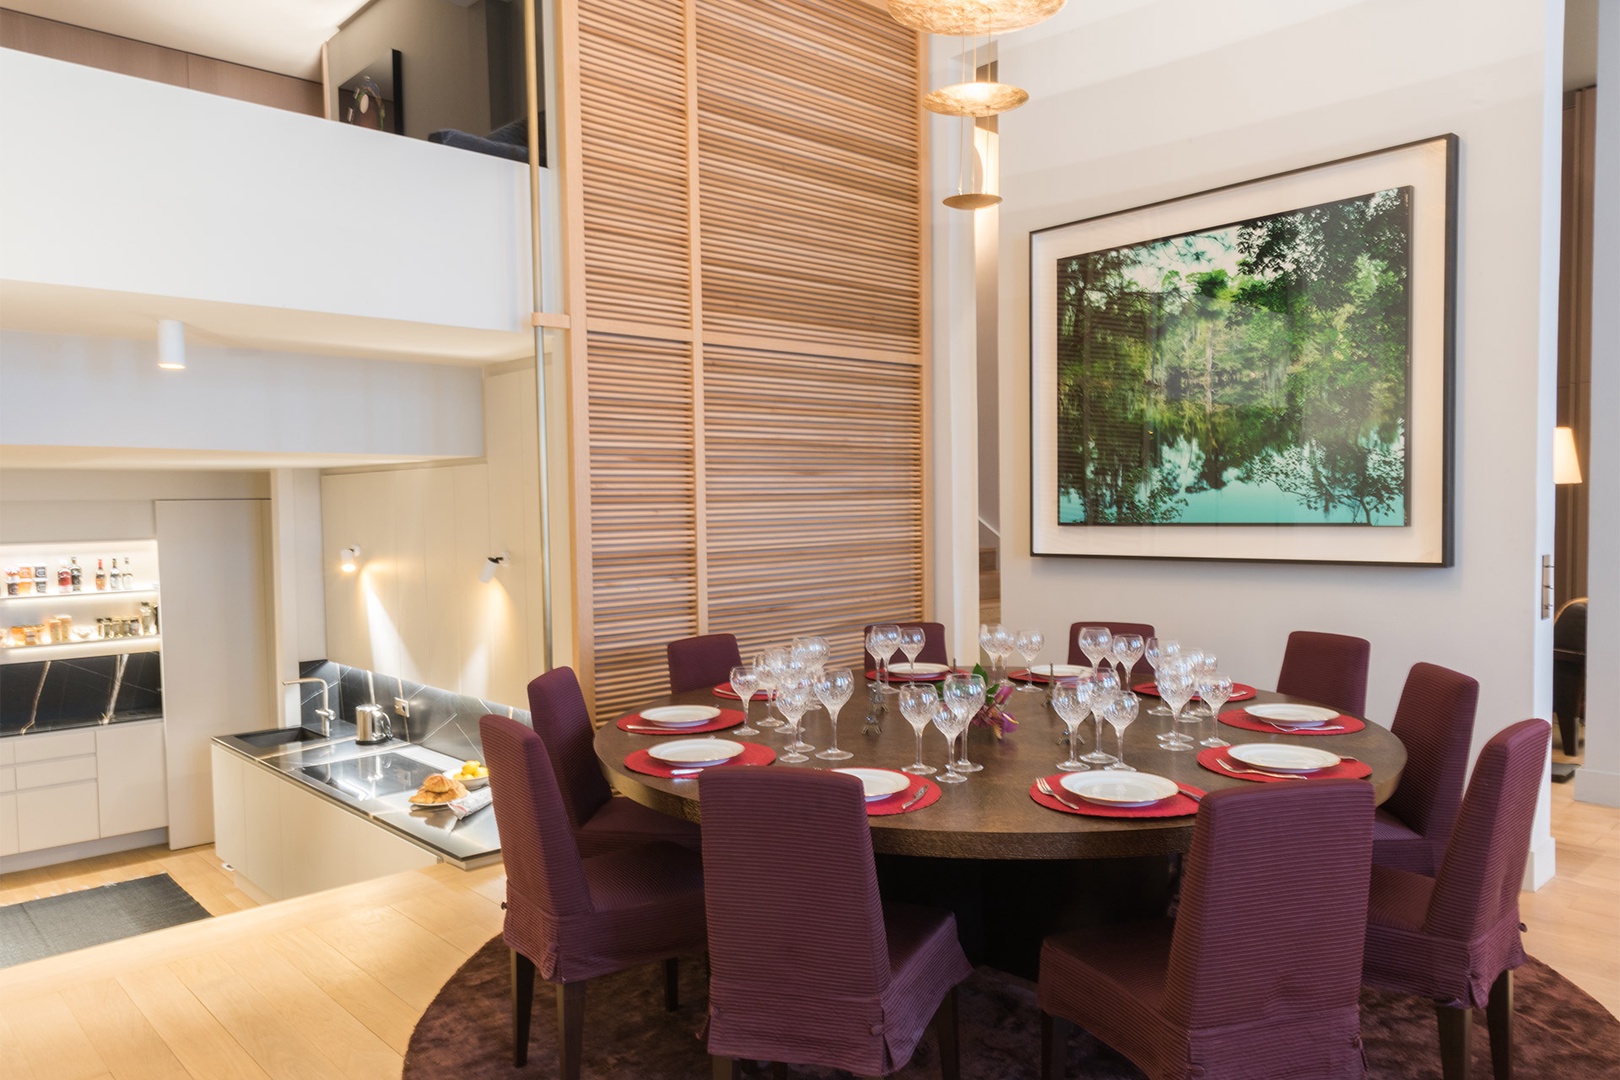 The centerpiece of the room is a grand dining table that seats up to 10 people.